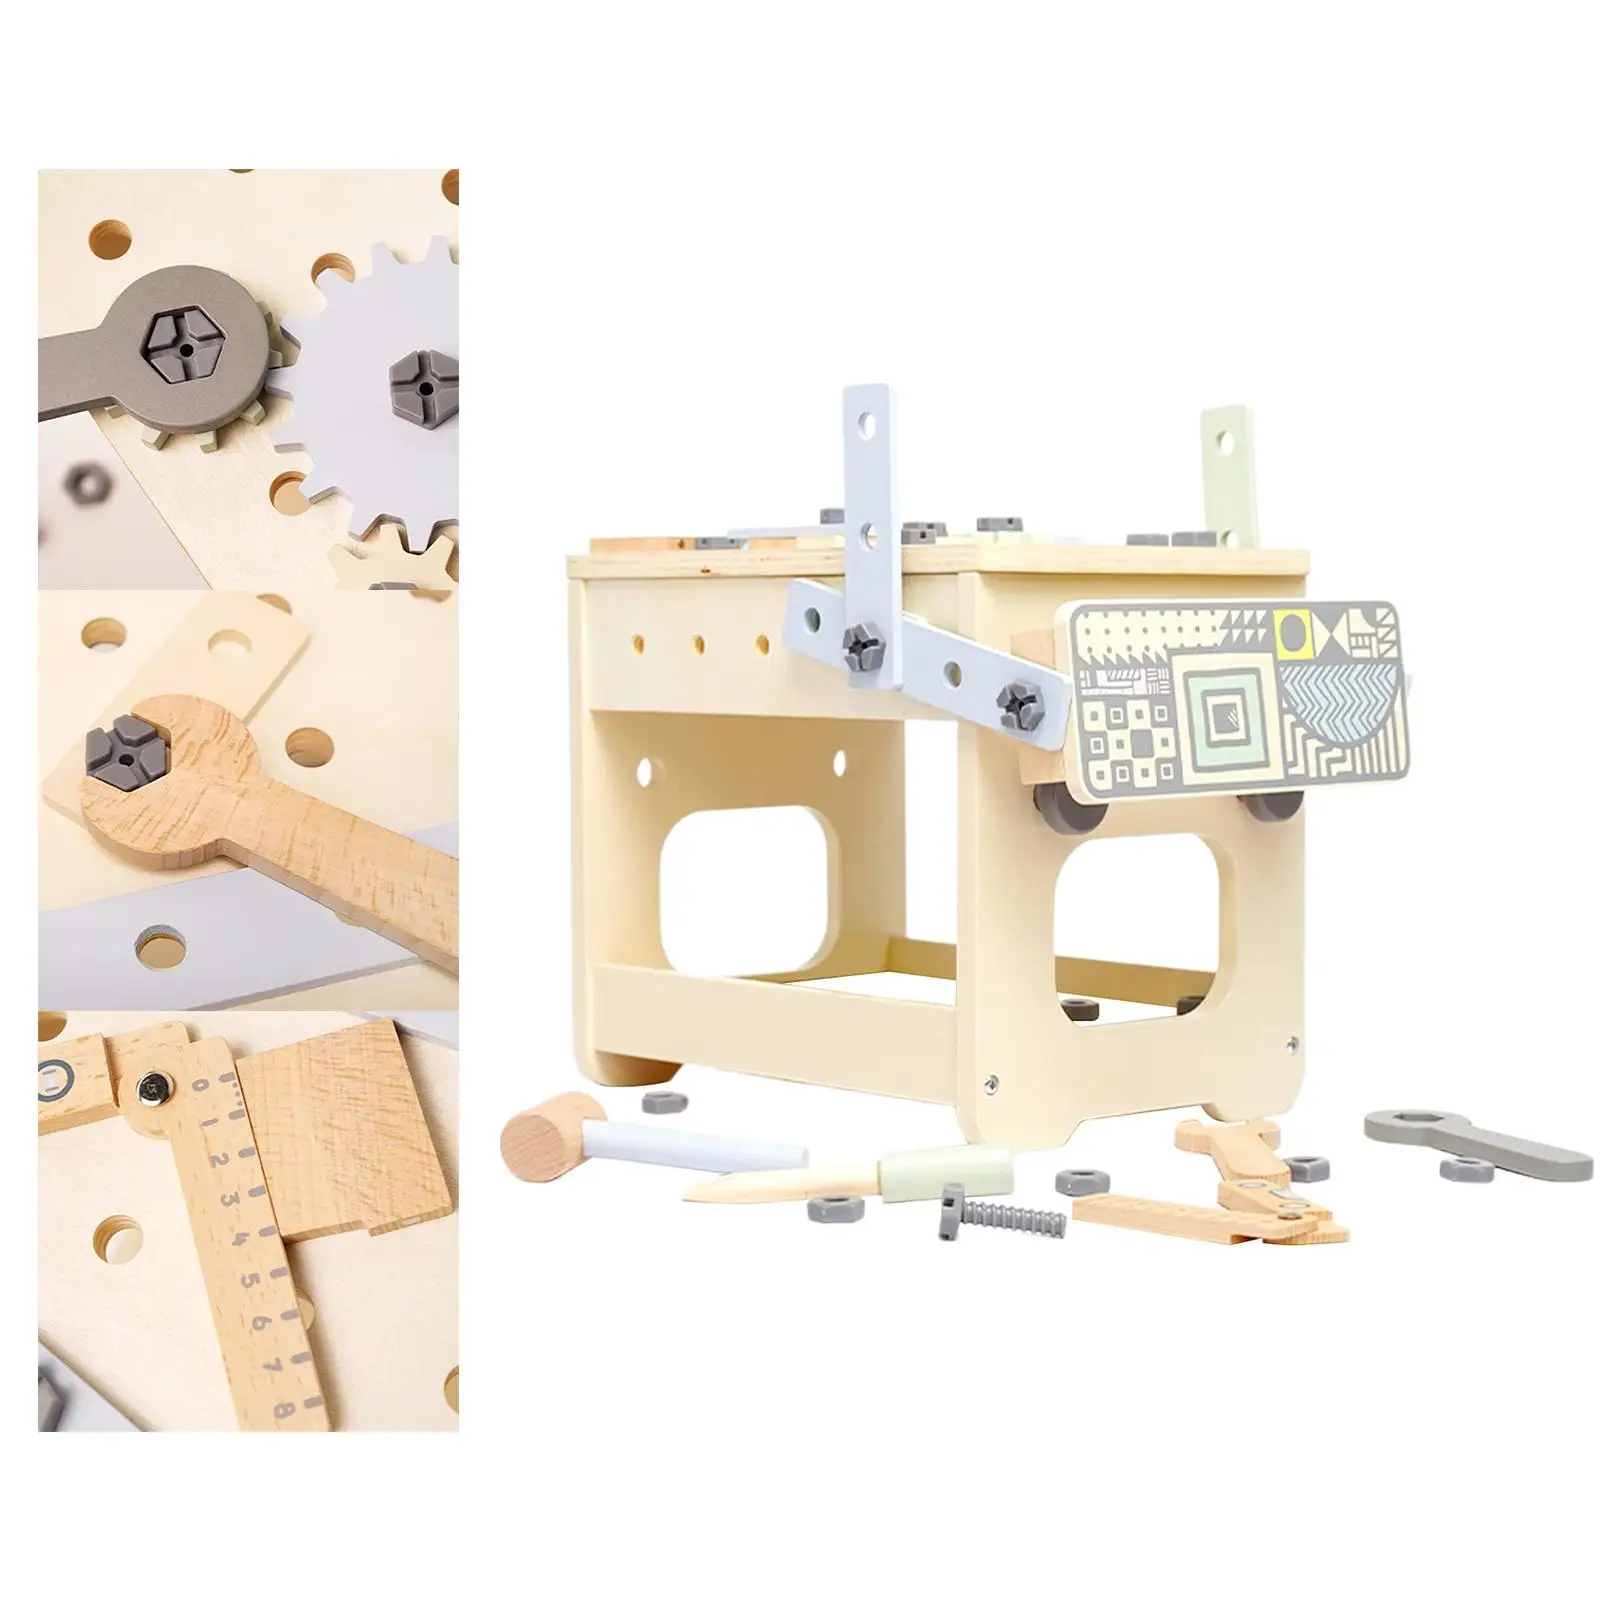 Tool bench Set Wooden Toy Developmental Multifunctional DIY Creative DIY Construction Toy for Education Learning Activities